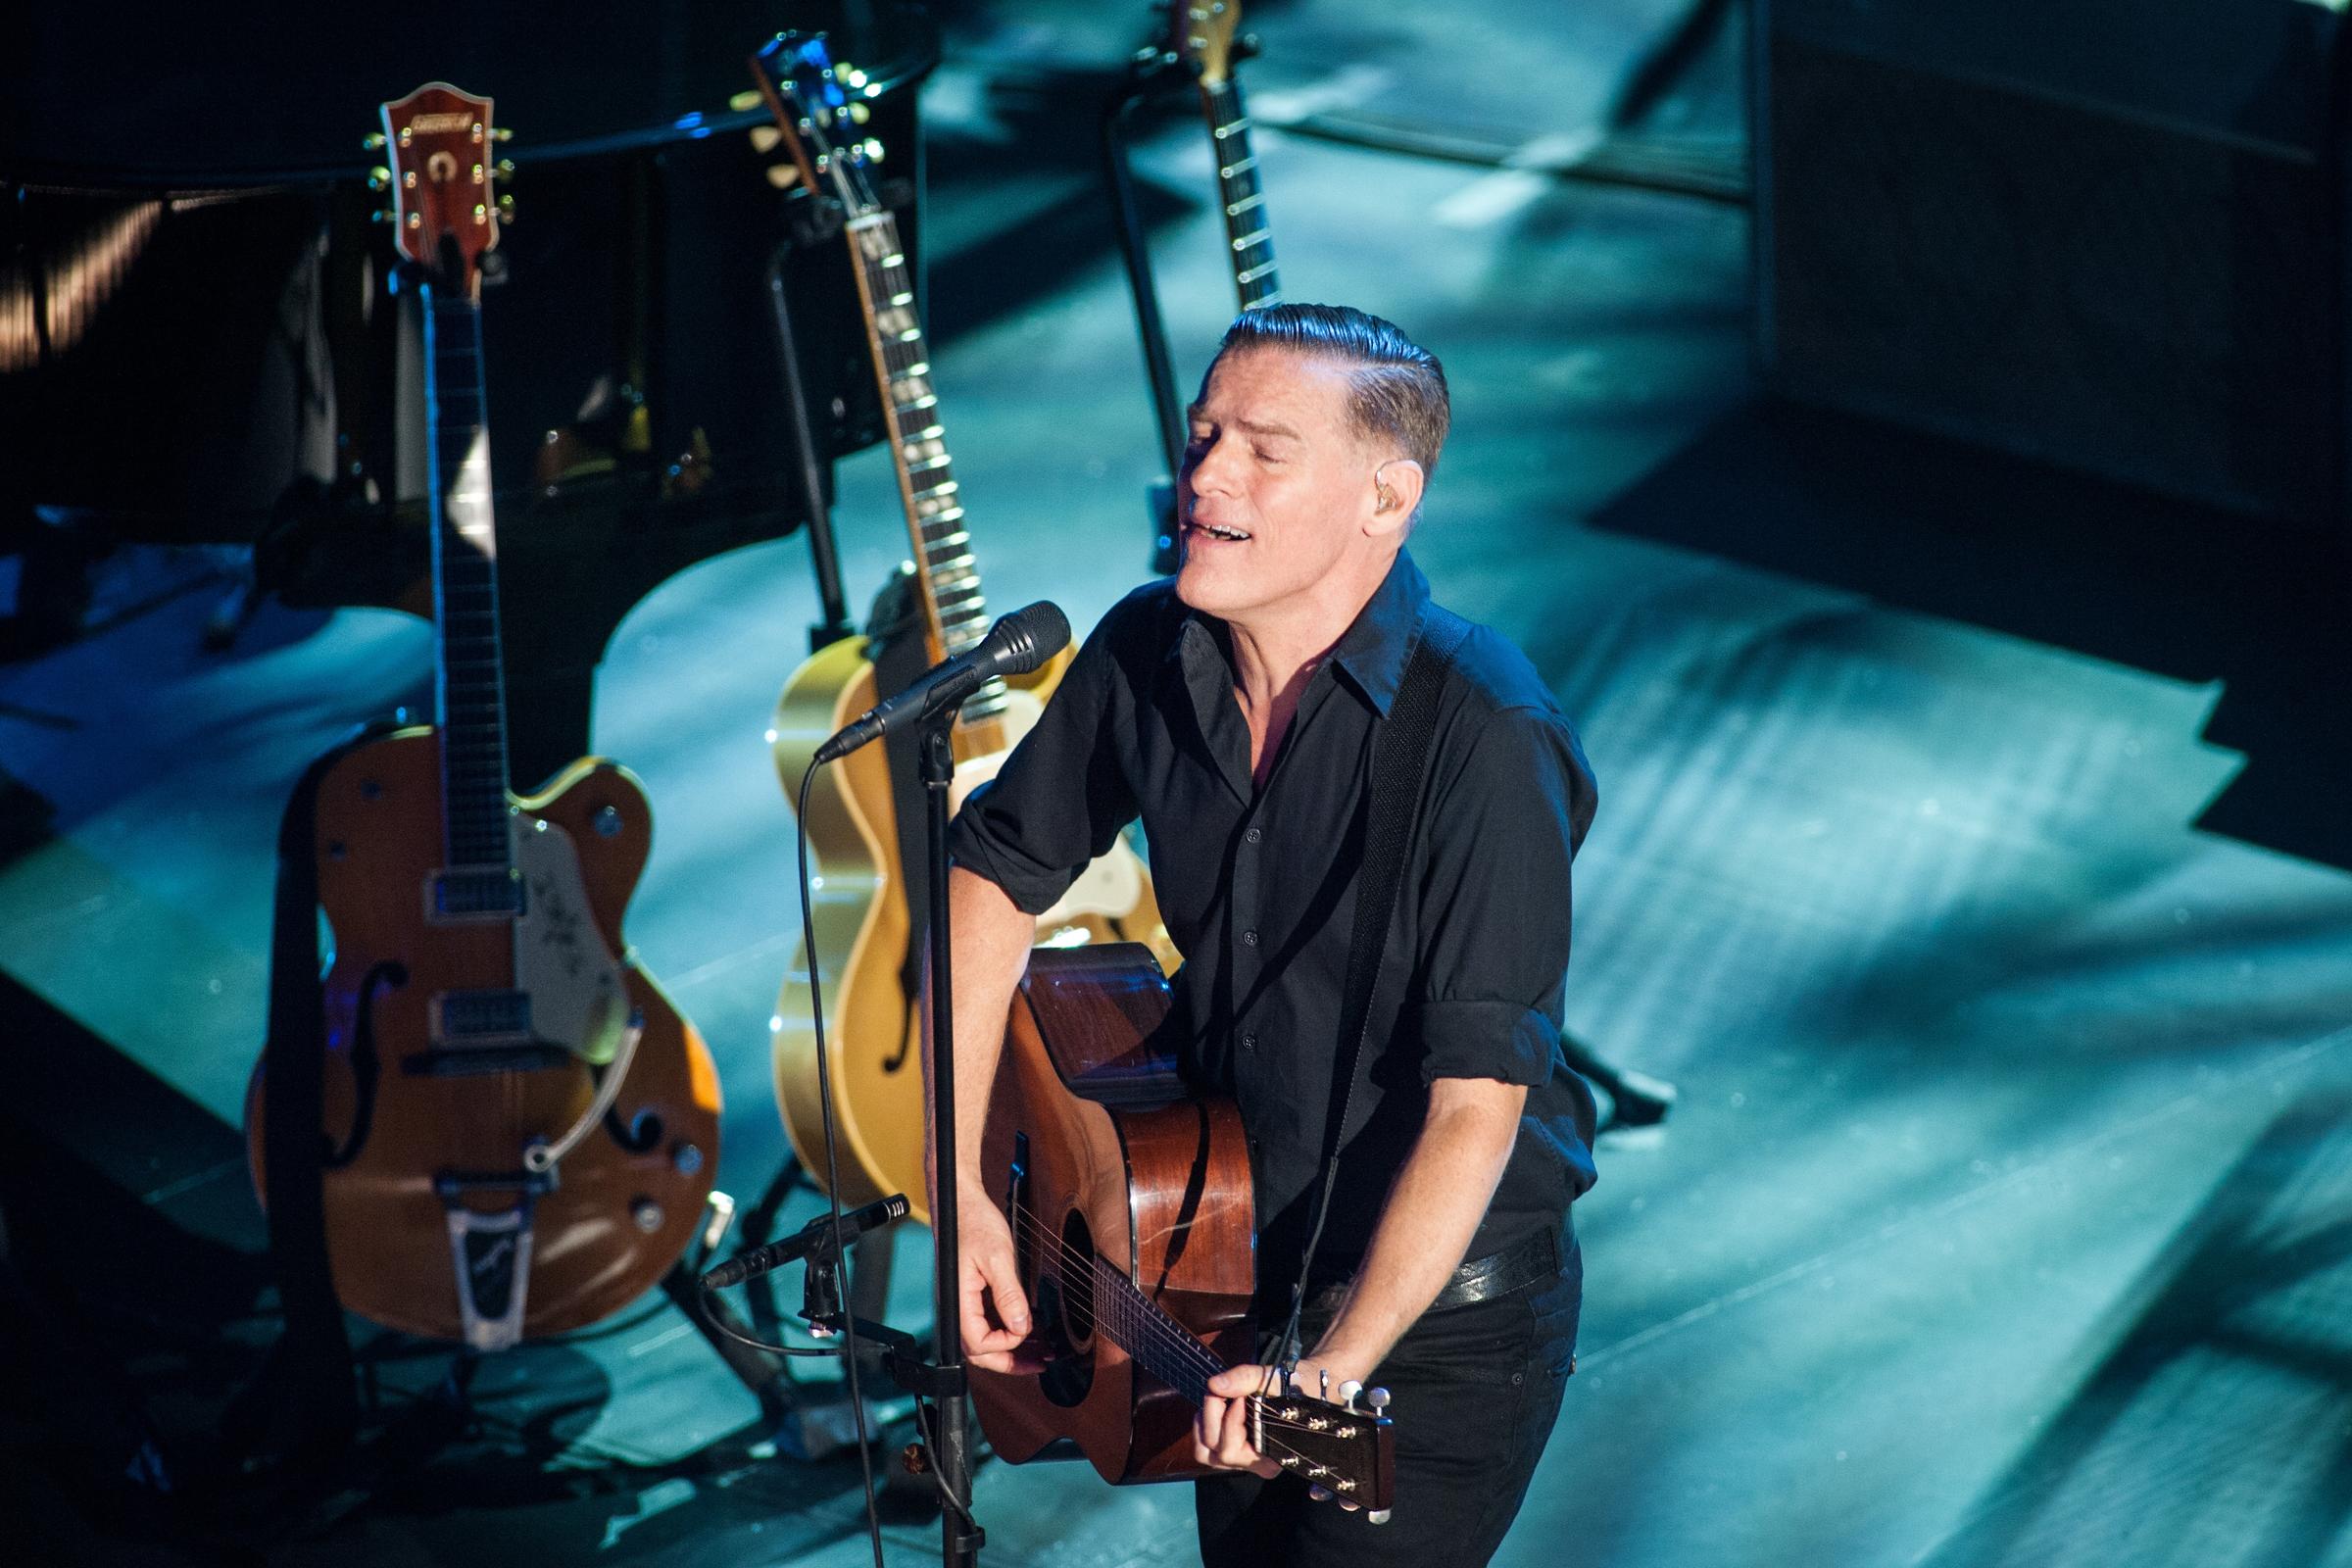 "Bryan Adams in Concert" airs on Saturday, March 14th at 830 pm KENW